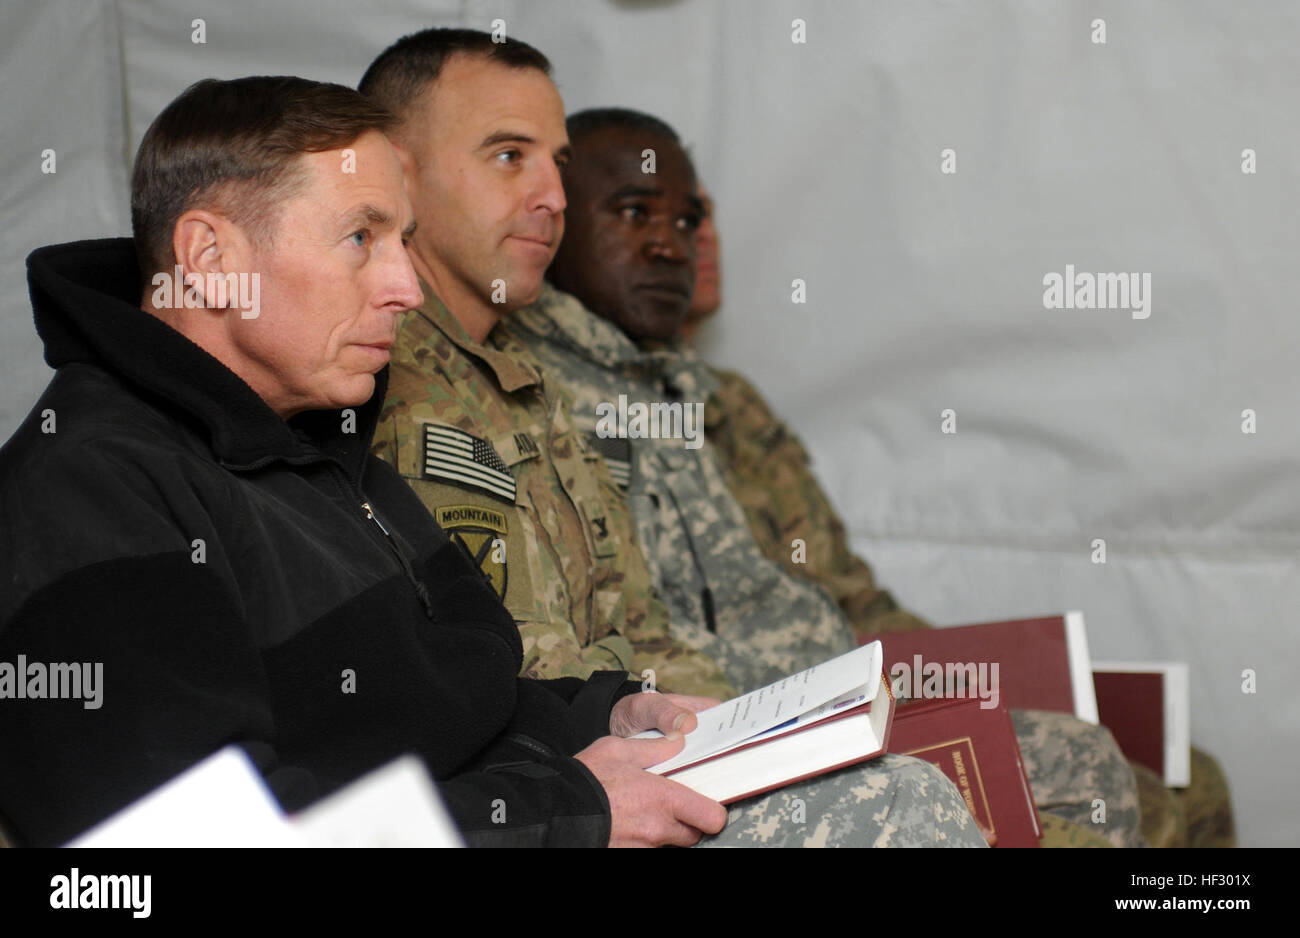 LOGAR Province, Afghanistan - U.S. Army Gen. David H. Petraeus (left), International Security Assistance Force commanding general from Cornwall on Hudson, N.Y., listens to a Christmas Eve sermon from U.S. Army Chaplain Capt. Jeff Bernard, battalion chaplain for 94th Brigade Support Battalion, 4th Brigade Combat Team, 10th Mountain Division from ???? during a candlelight service on Forward Operating Base Shank, Afghanistan, Dec. 24., From left, sitting in the row with Petraeus are U.S. Army Col. Bruce P. Antonia, commander of 4th BCT, 10th Mtn. Div. from Manchester, Conn.; U.S. Army Command Sgt Stock Photo